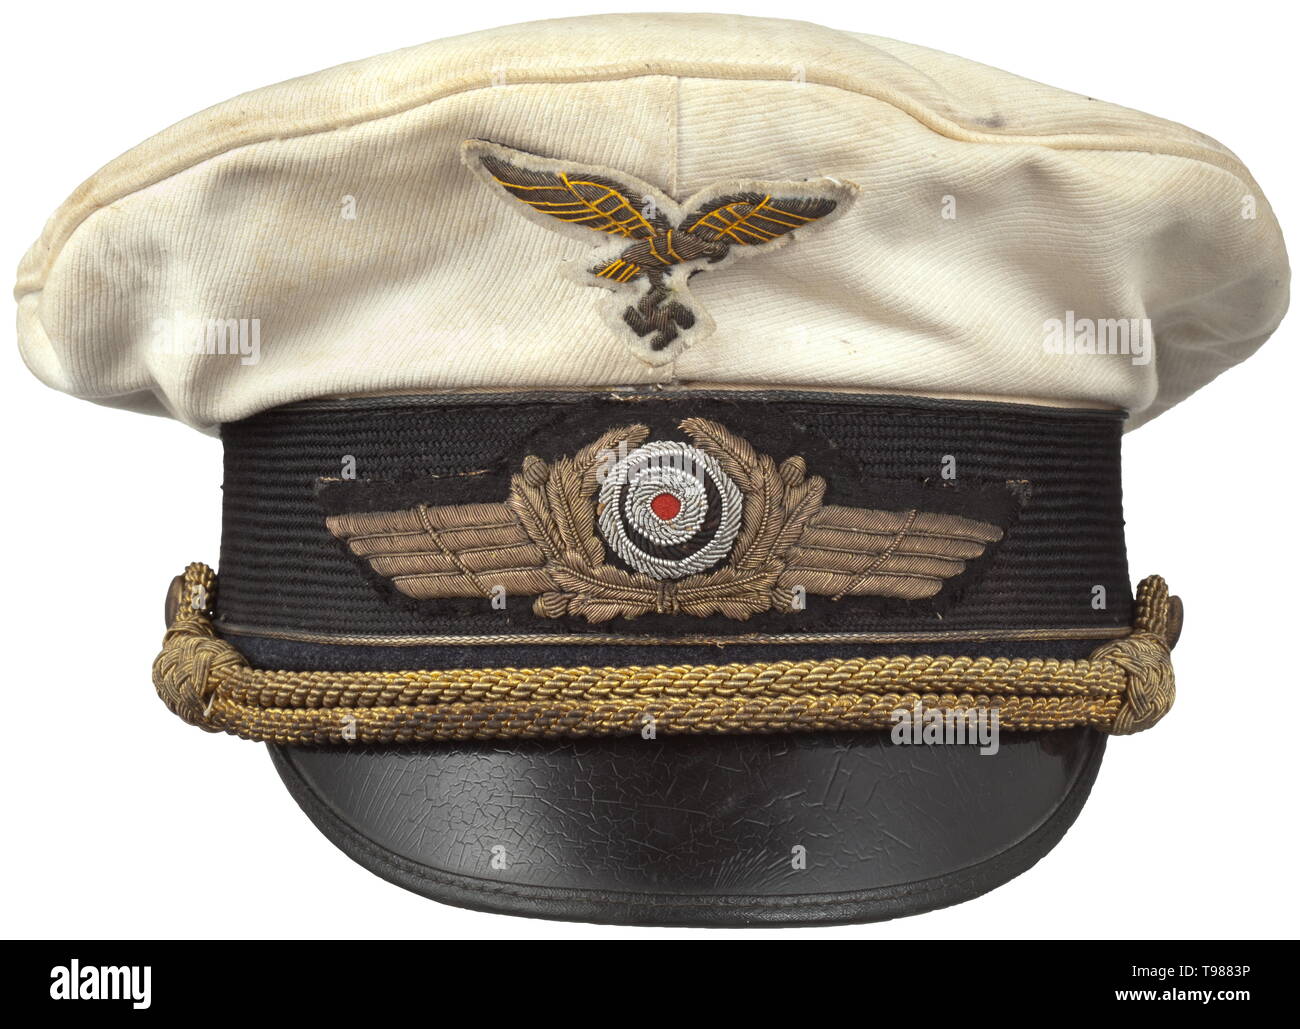 A visor cap for a general of the Luftwaffe in the white summer issue The cap cover of white linen, black mohair trim band, the lower cap edge of Luftwaffe-blue cloth with gold general's braid, white silk liner, the cap trapezoid with silver imprint 'Deutsche Facharbeit', light brown leather sweatband, hand embroidered cap insignia (the eagle changeable on a metal base), gold cap cording. A lightly used visor cap. historic, historical, Air Force, branch of service, branches of service, armed service, armed services, military, militaria, air forces, object, objects, stills, c, Editorial-Use-Only Stock Photo